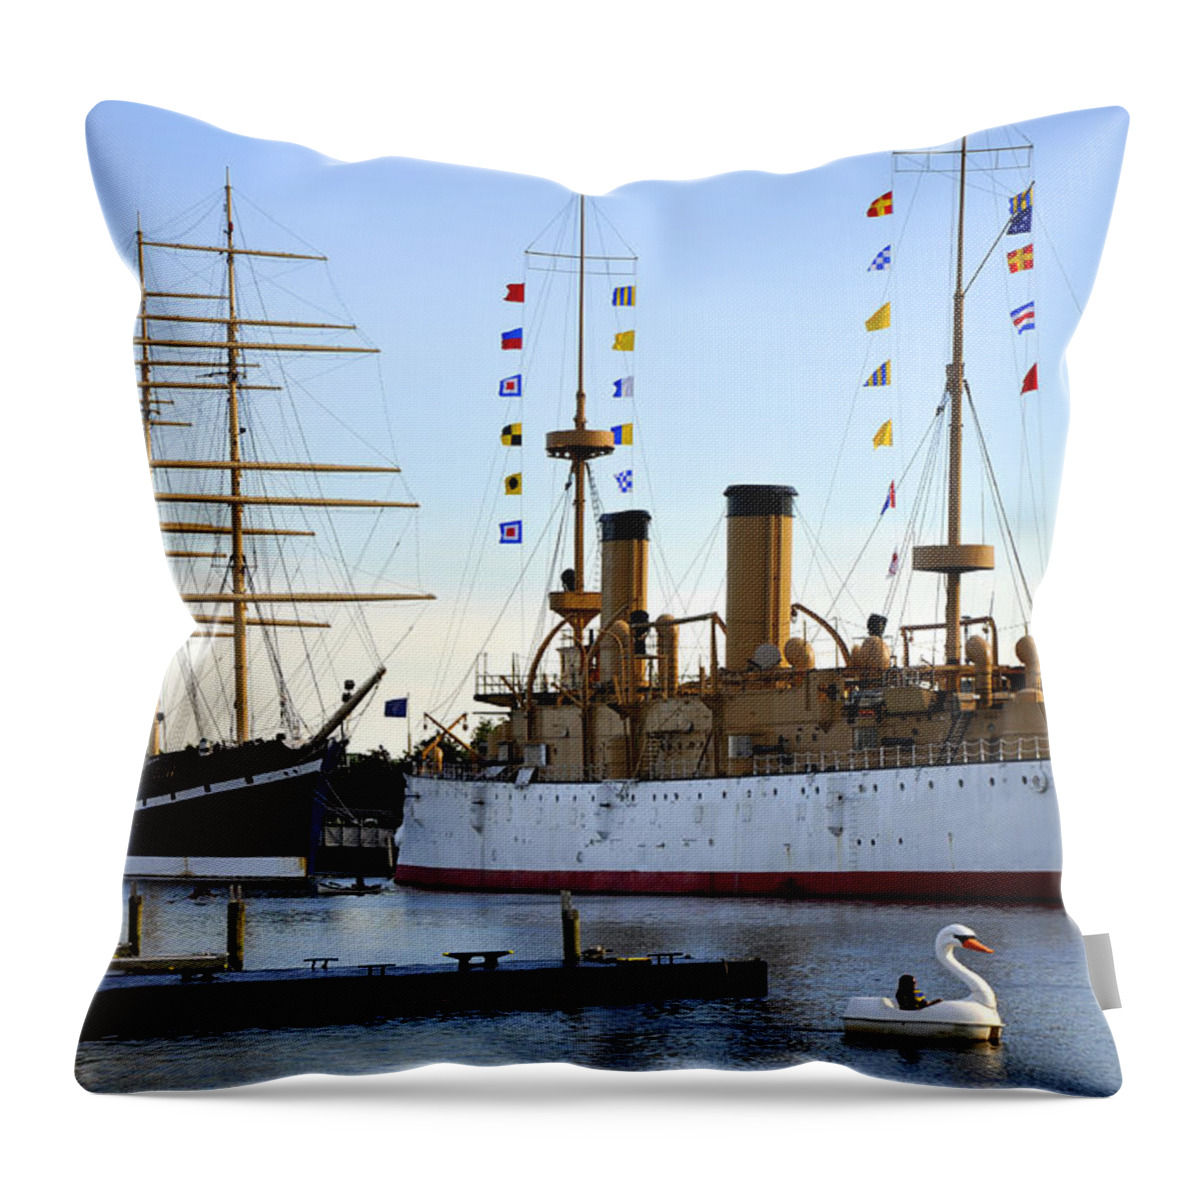 Penn's Landing Throw Pillow featuring the photograph Penn's Landing 2015 by Andrew Dinh